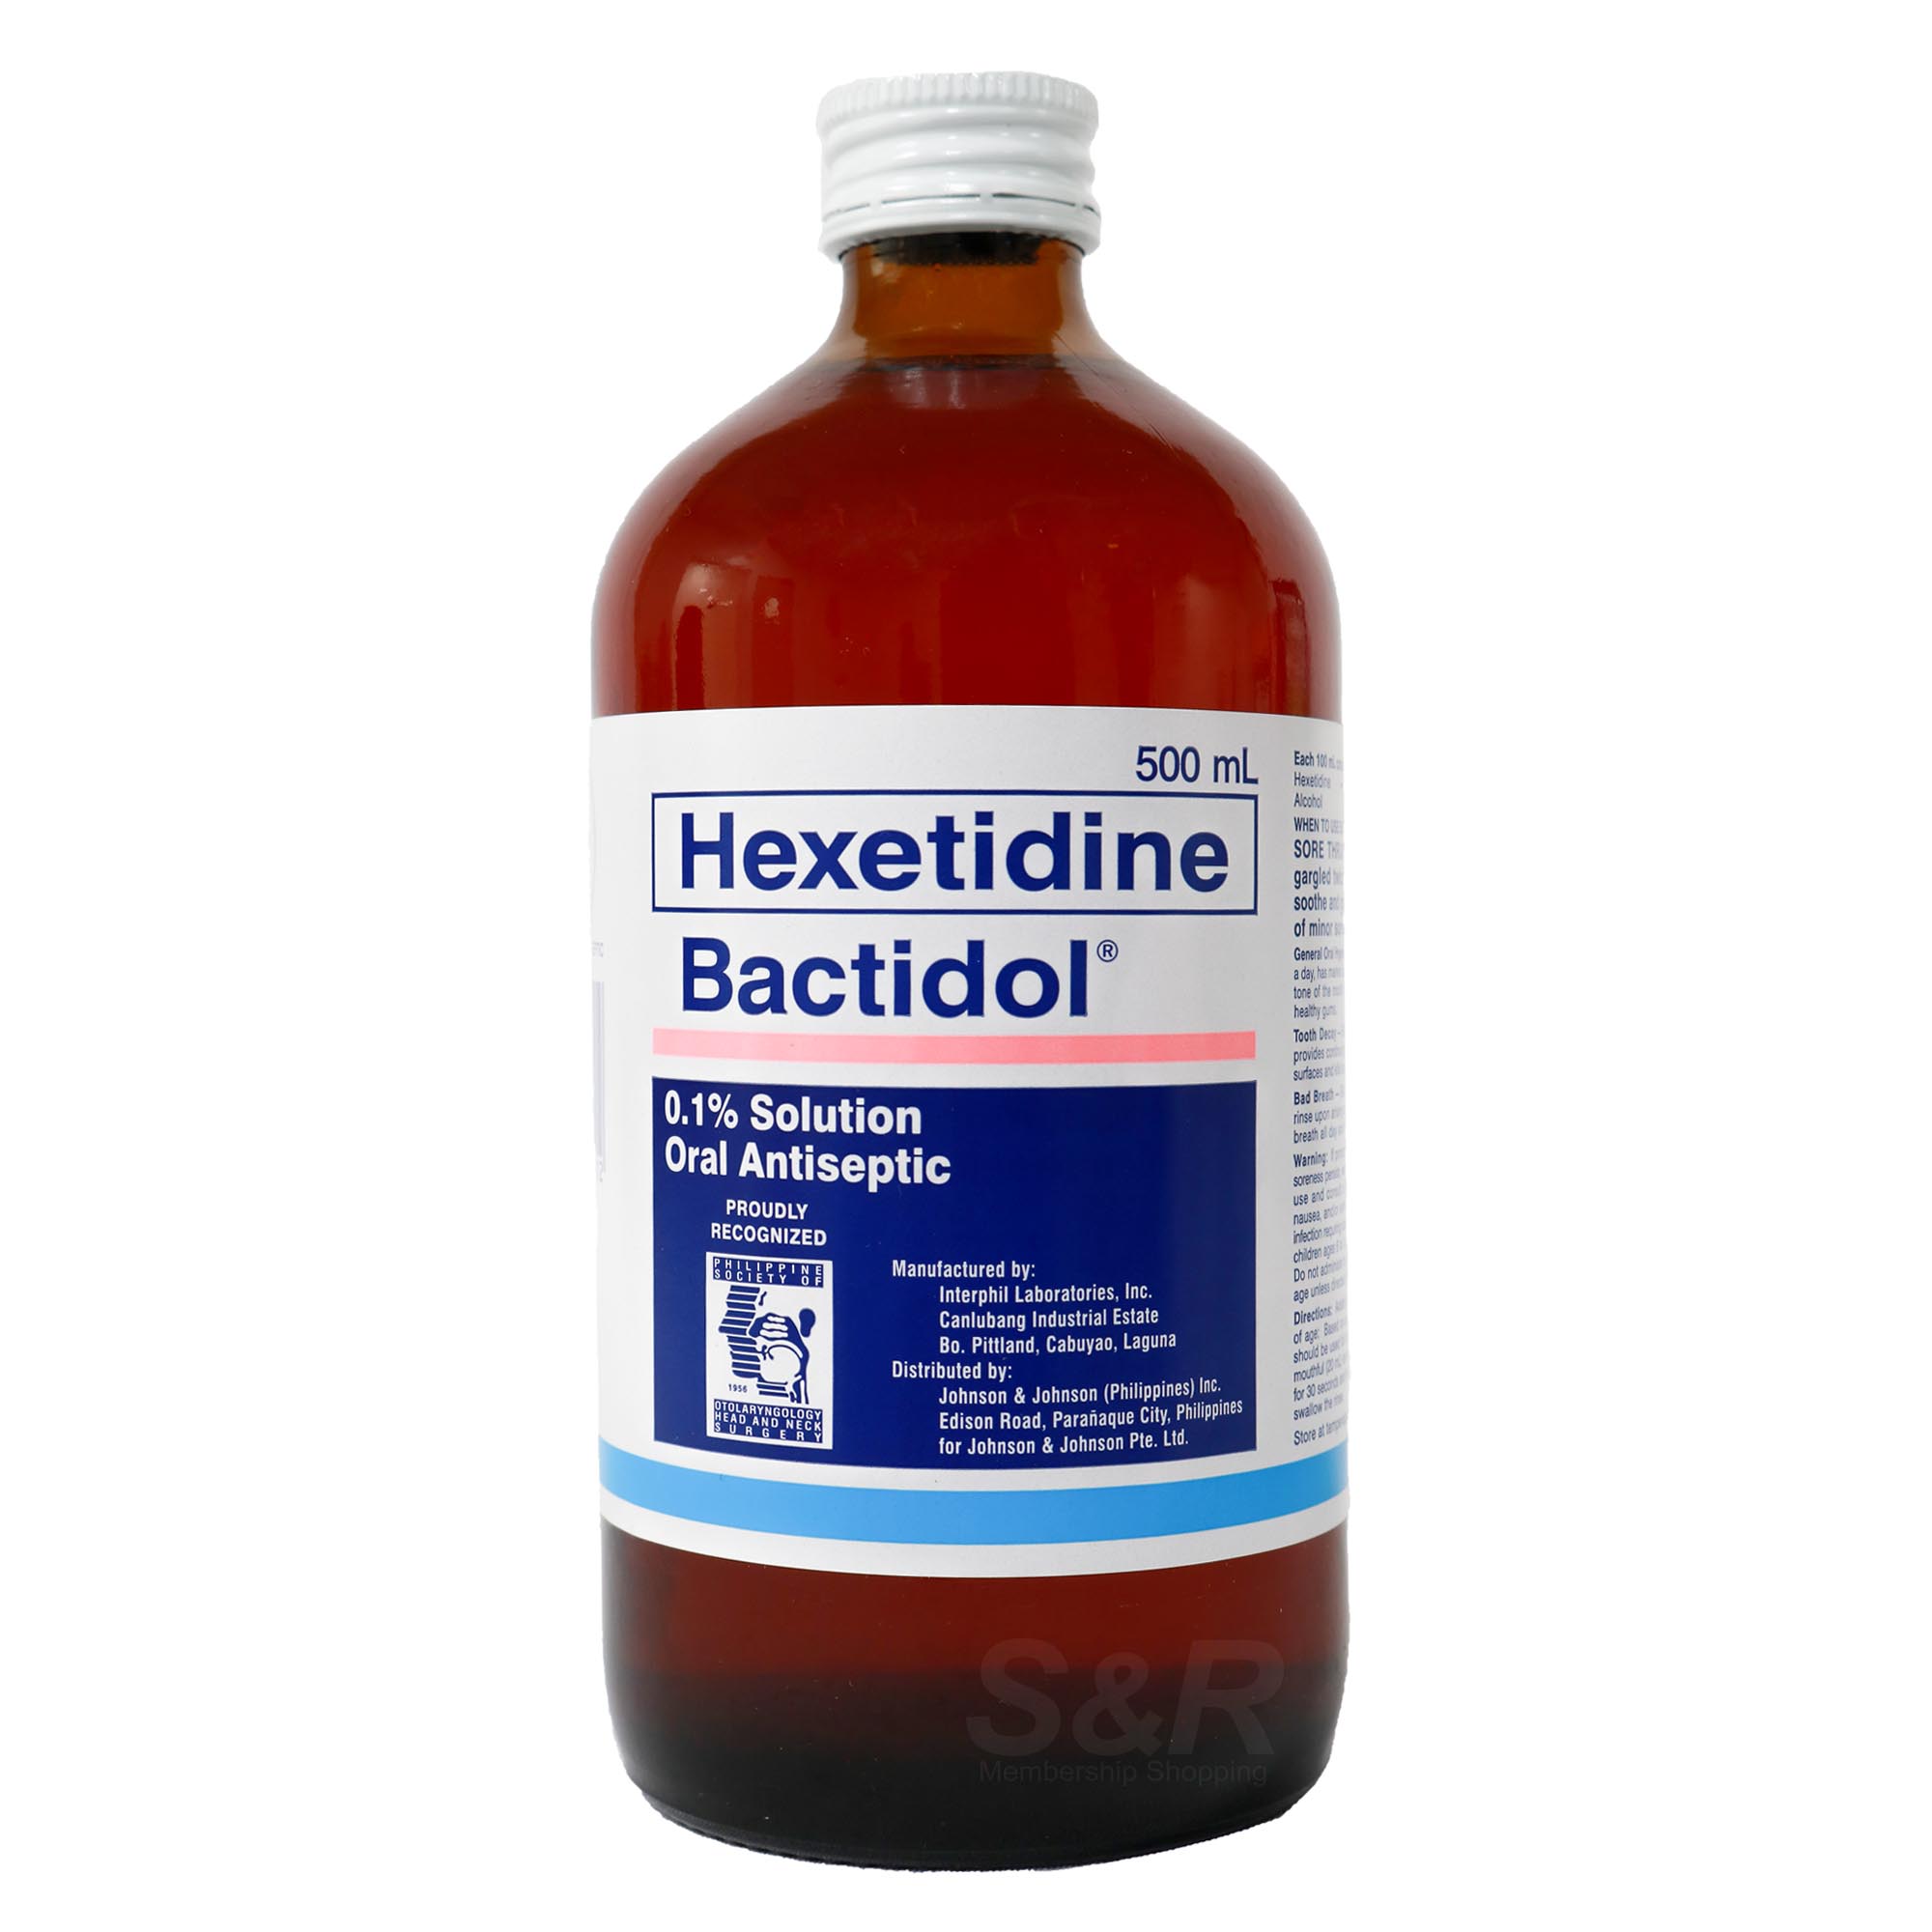 Hexetidine Bactidol Oral Antiseptic Solution 500mL